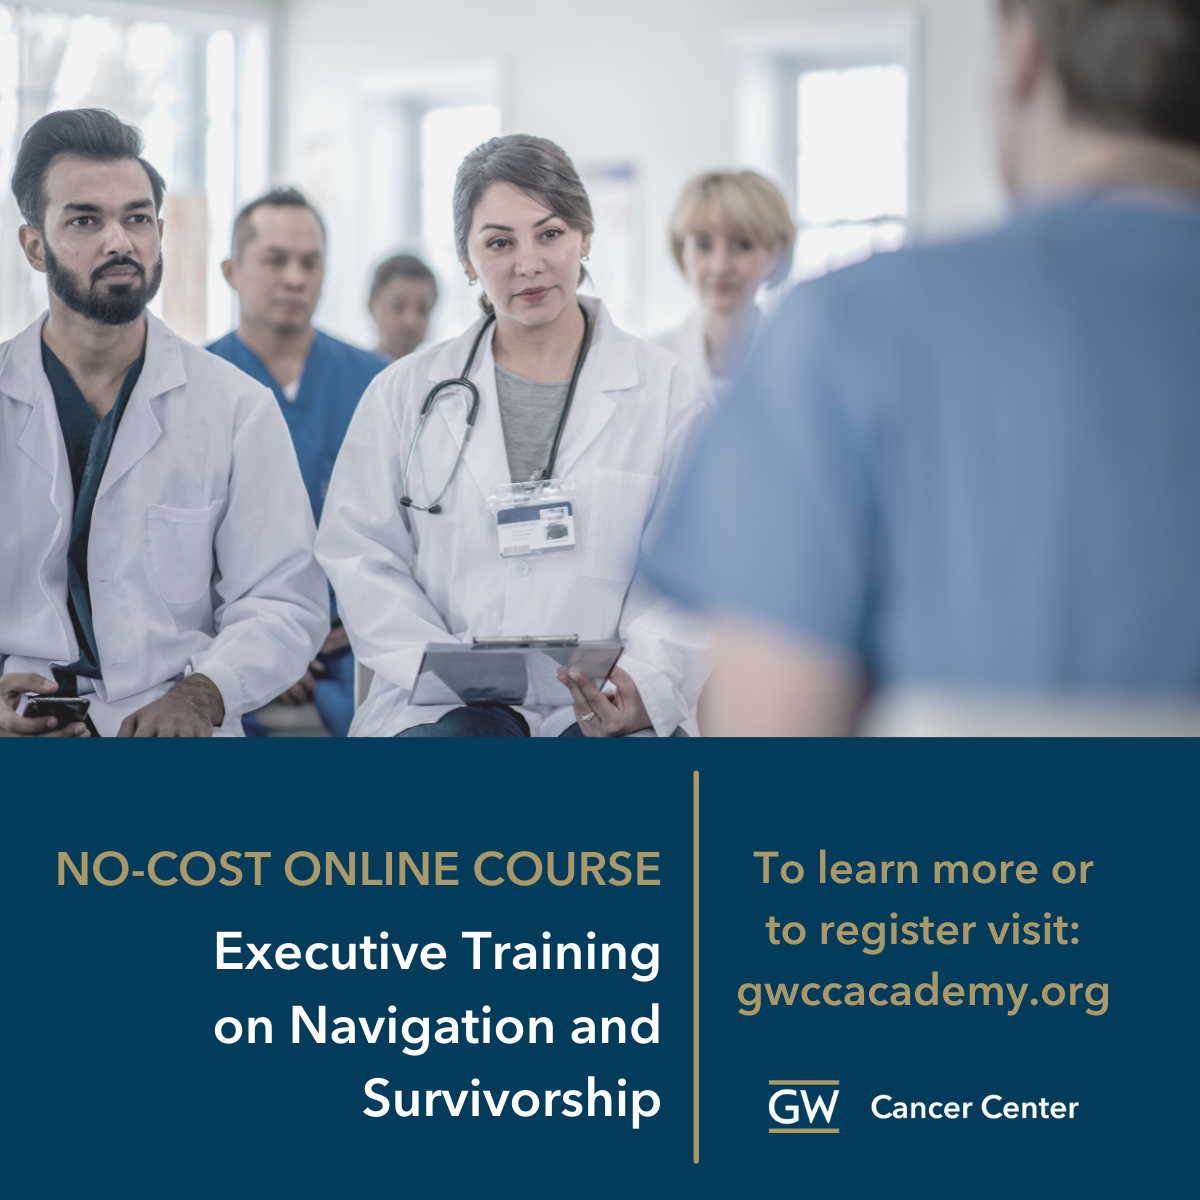 Group of clinicians at briefing. Text below reads "Executive Training on Navigation and Survivorship"